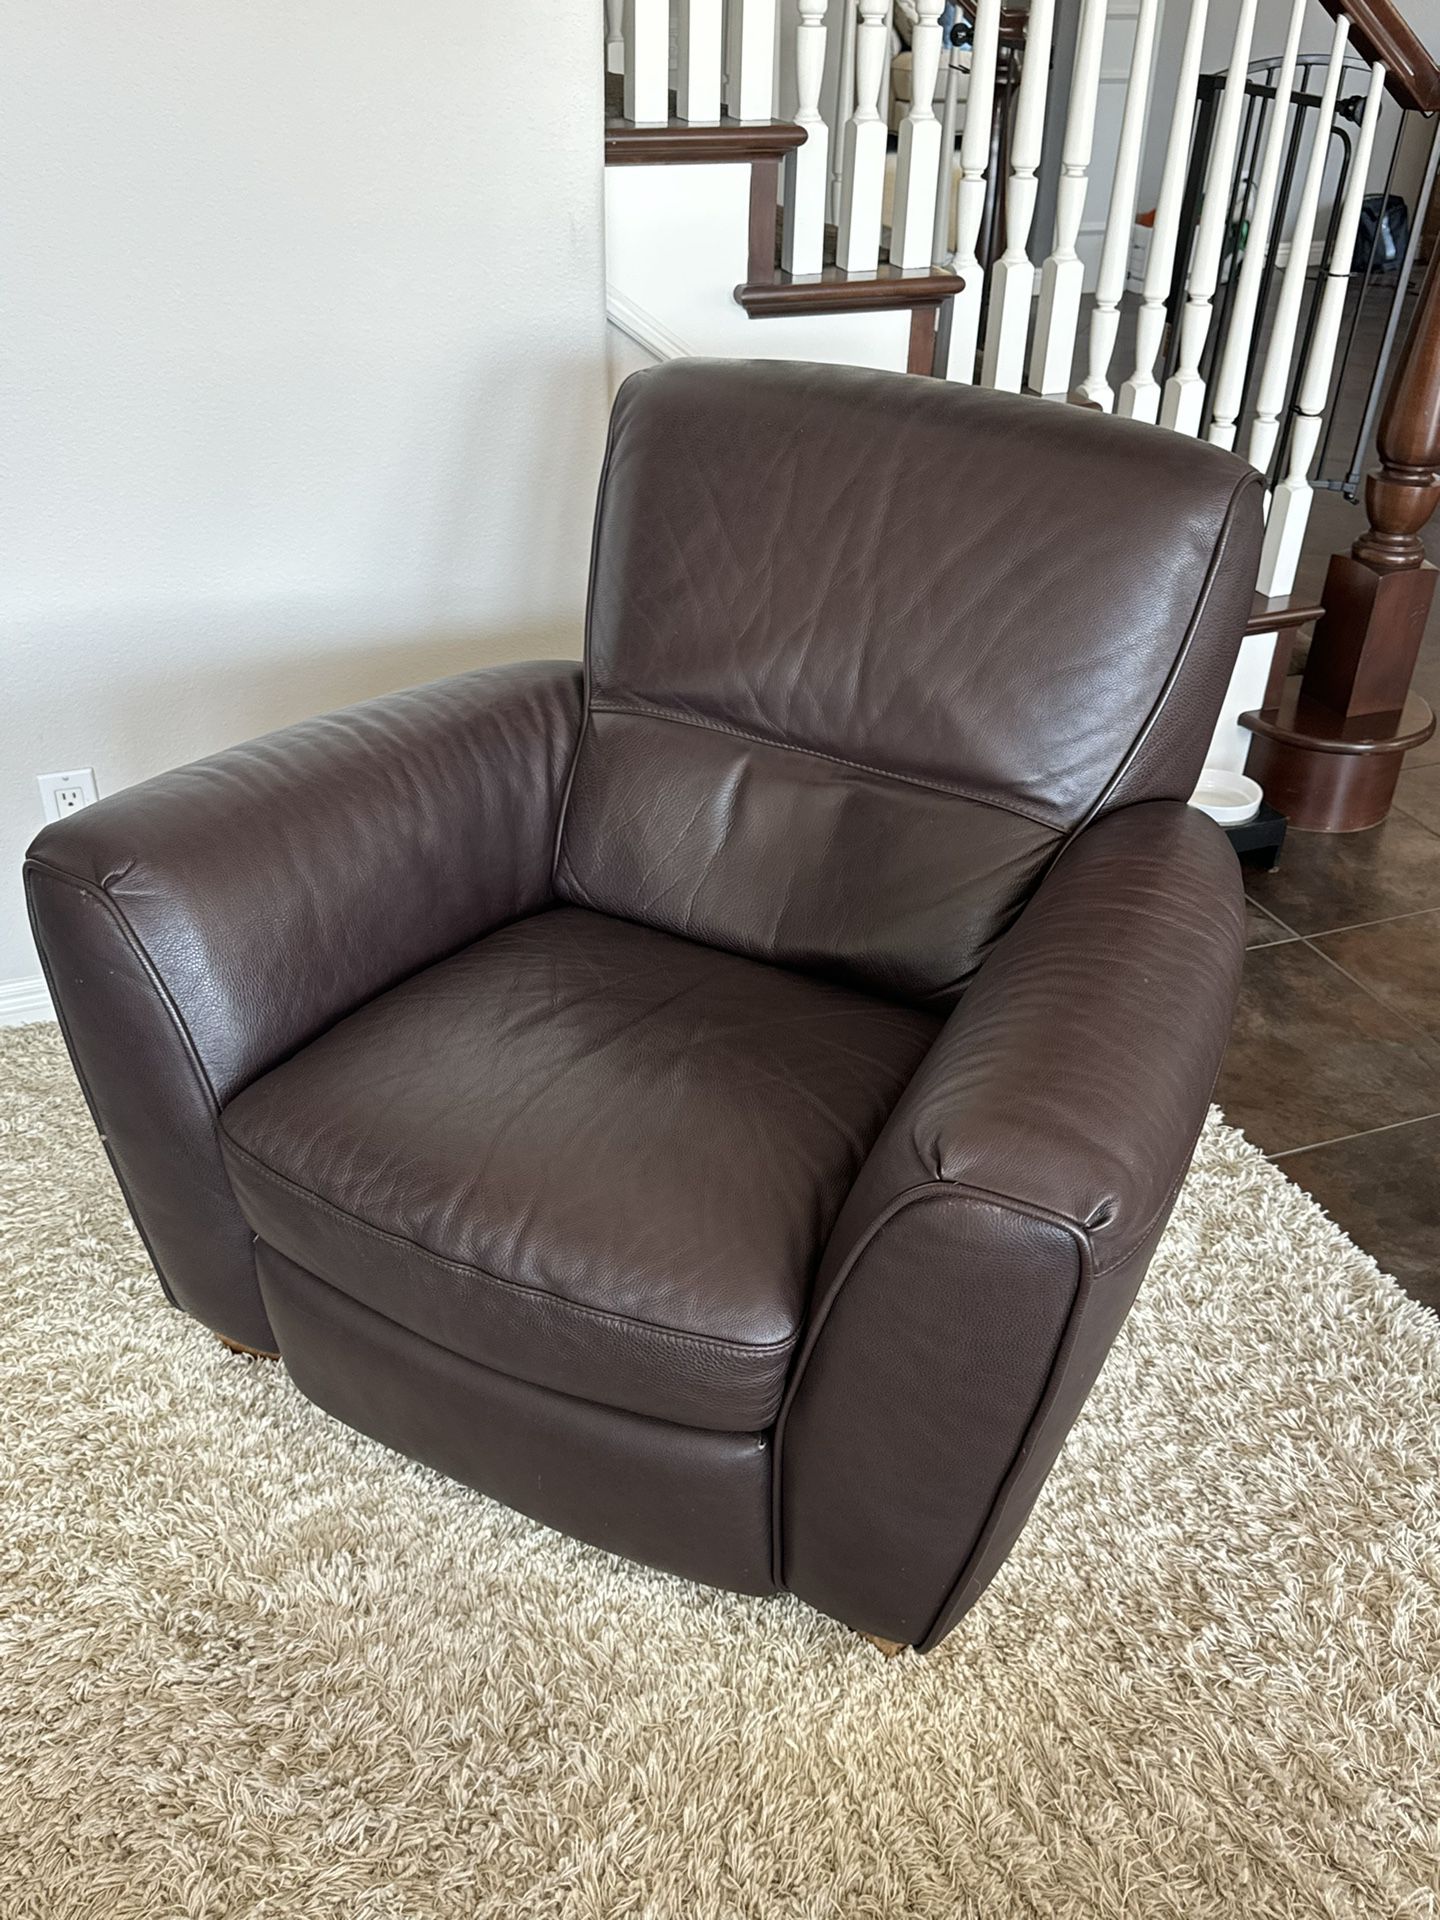 Manual Brown Leather Recliner Chair 